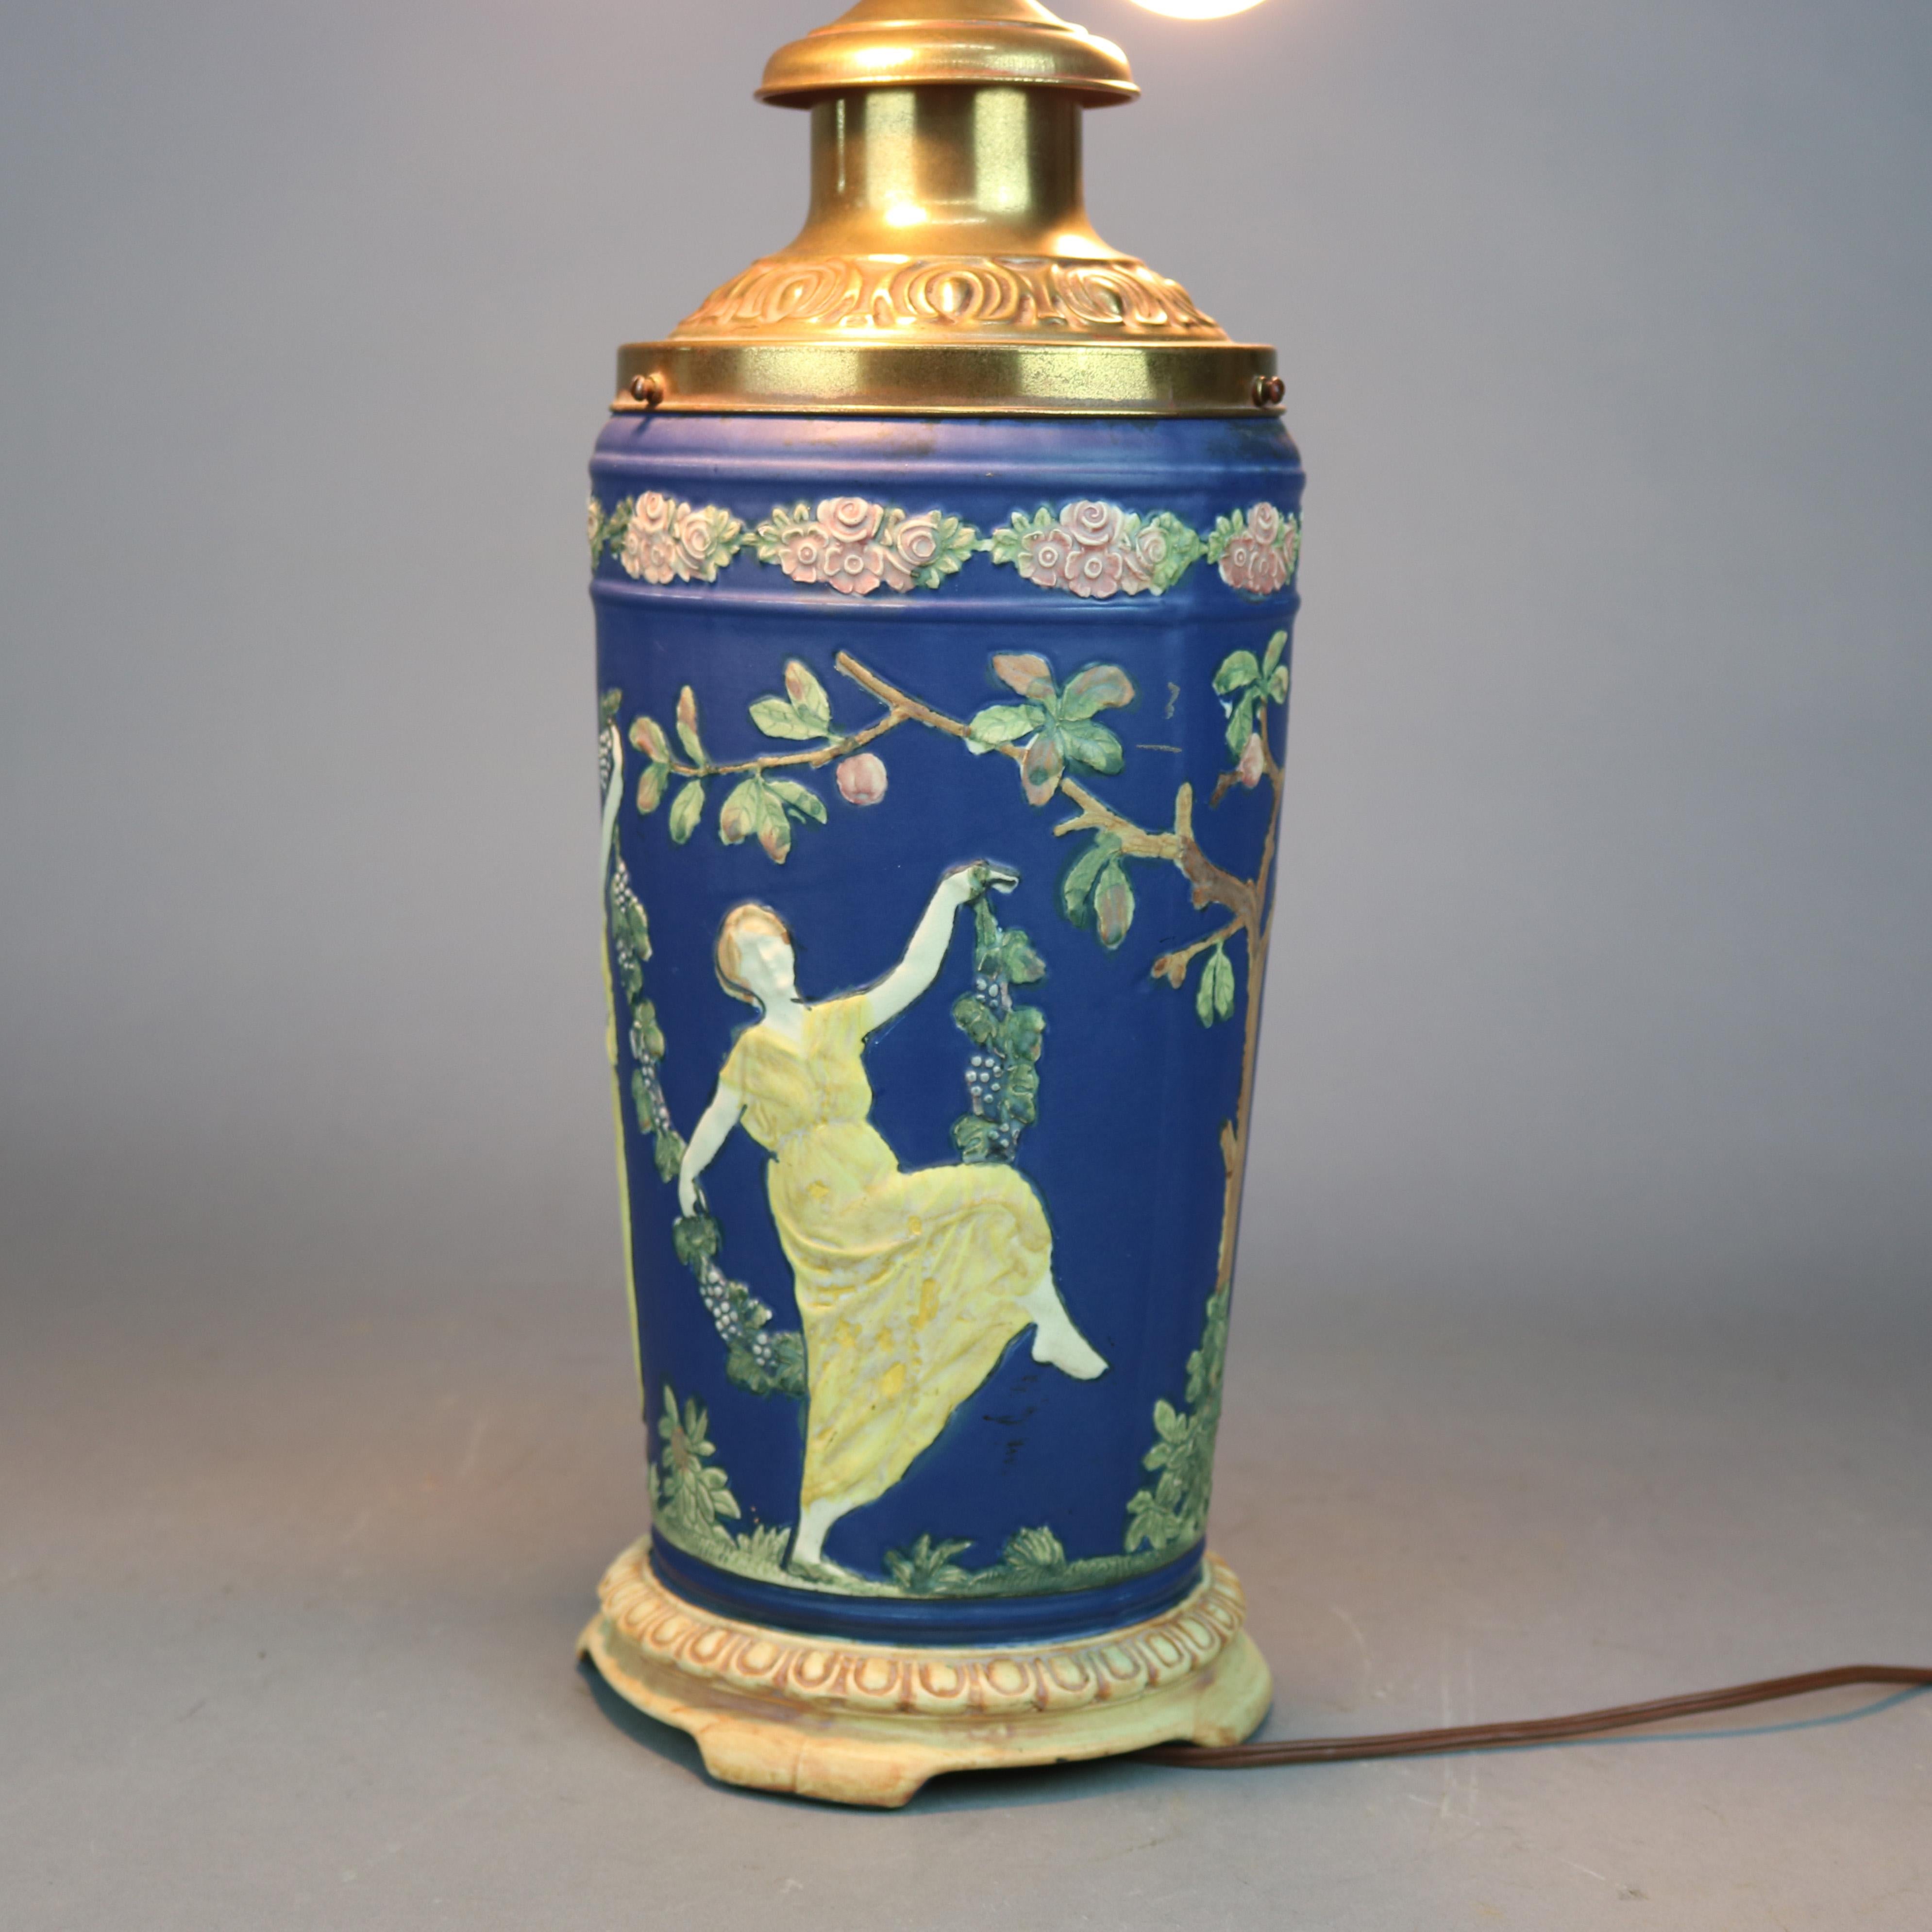 Antique Classical Greek Cameo Art Pottery Lamp Base Attr. Weller, c1930 For Sale 4